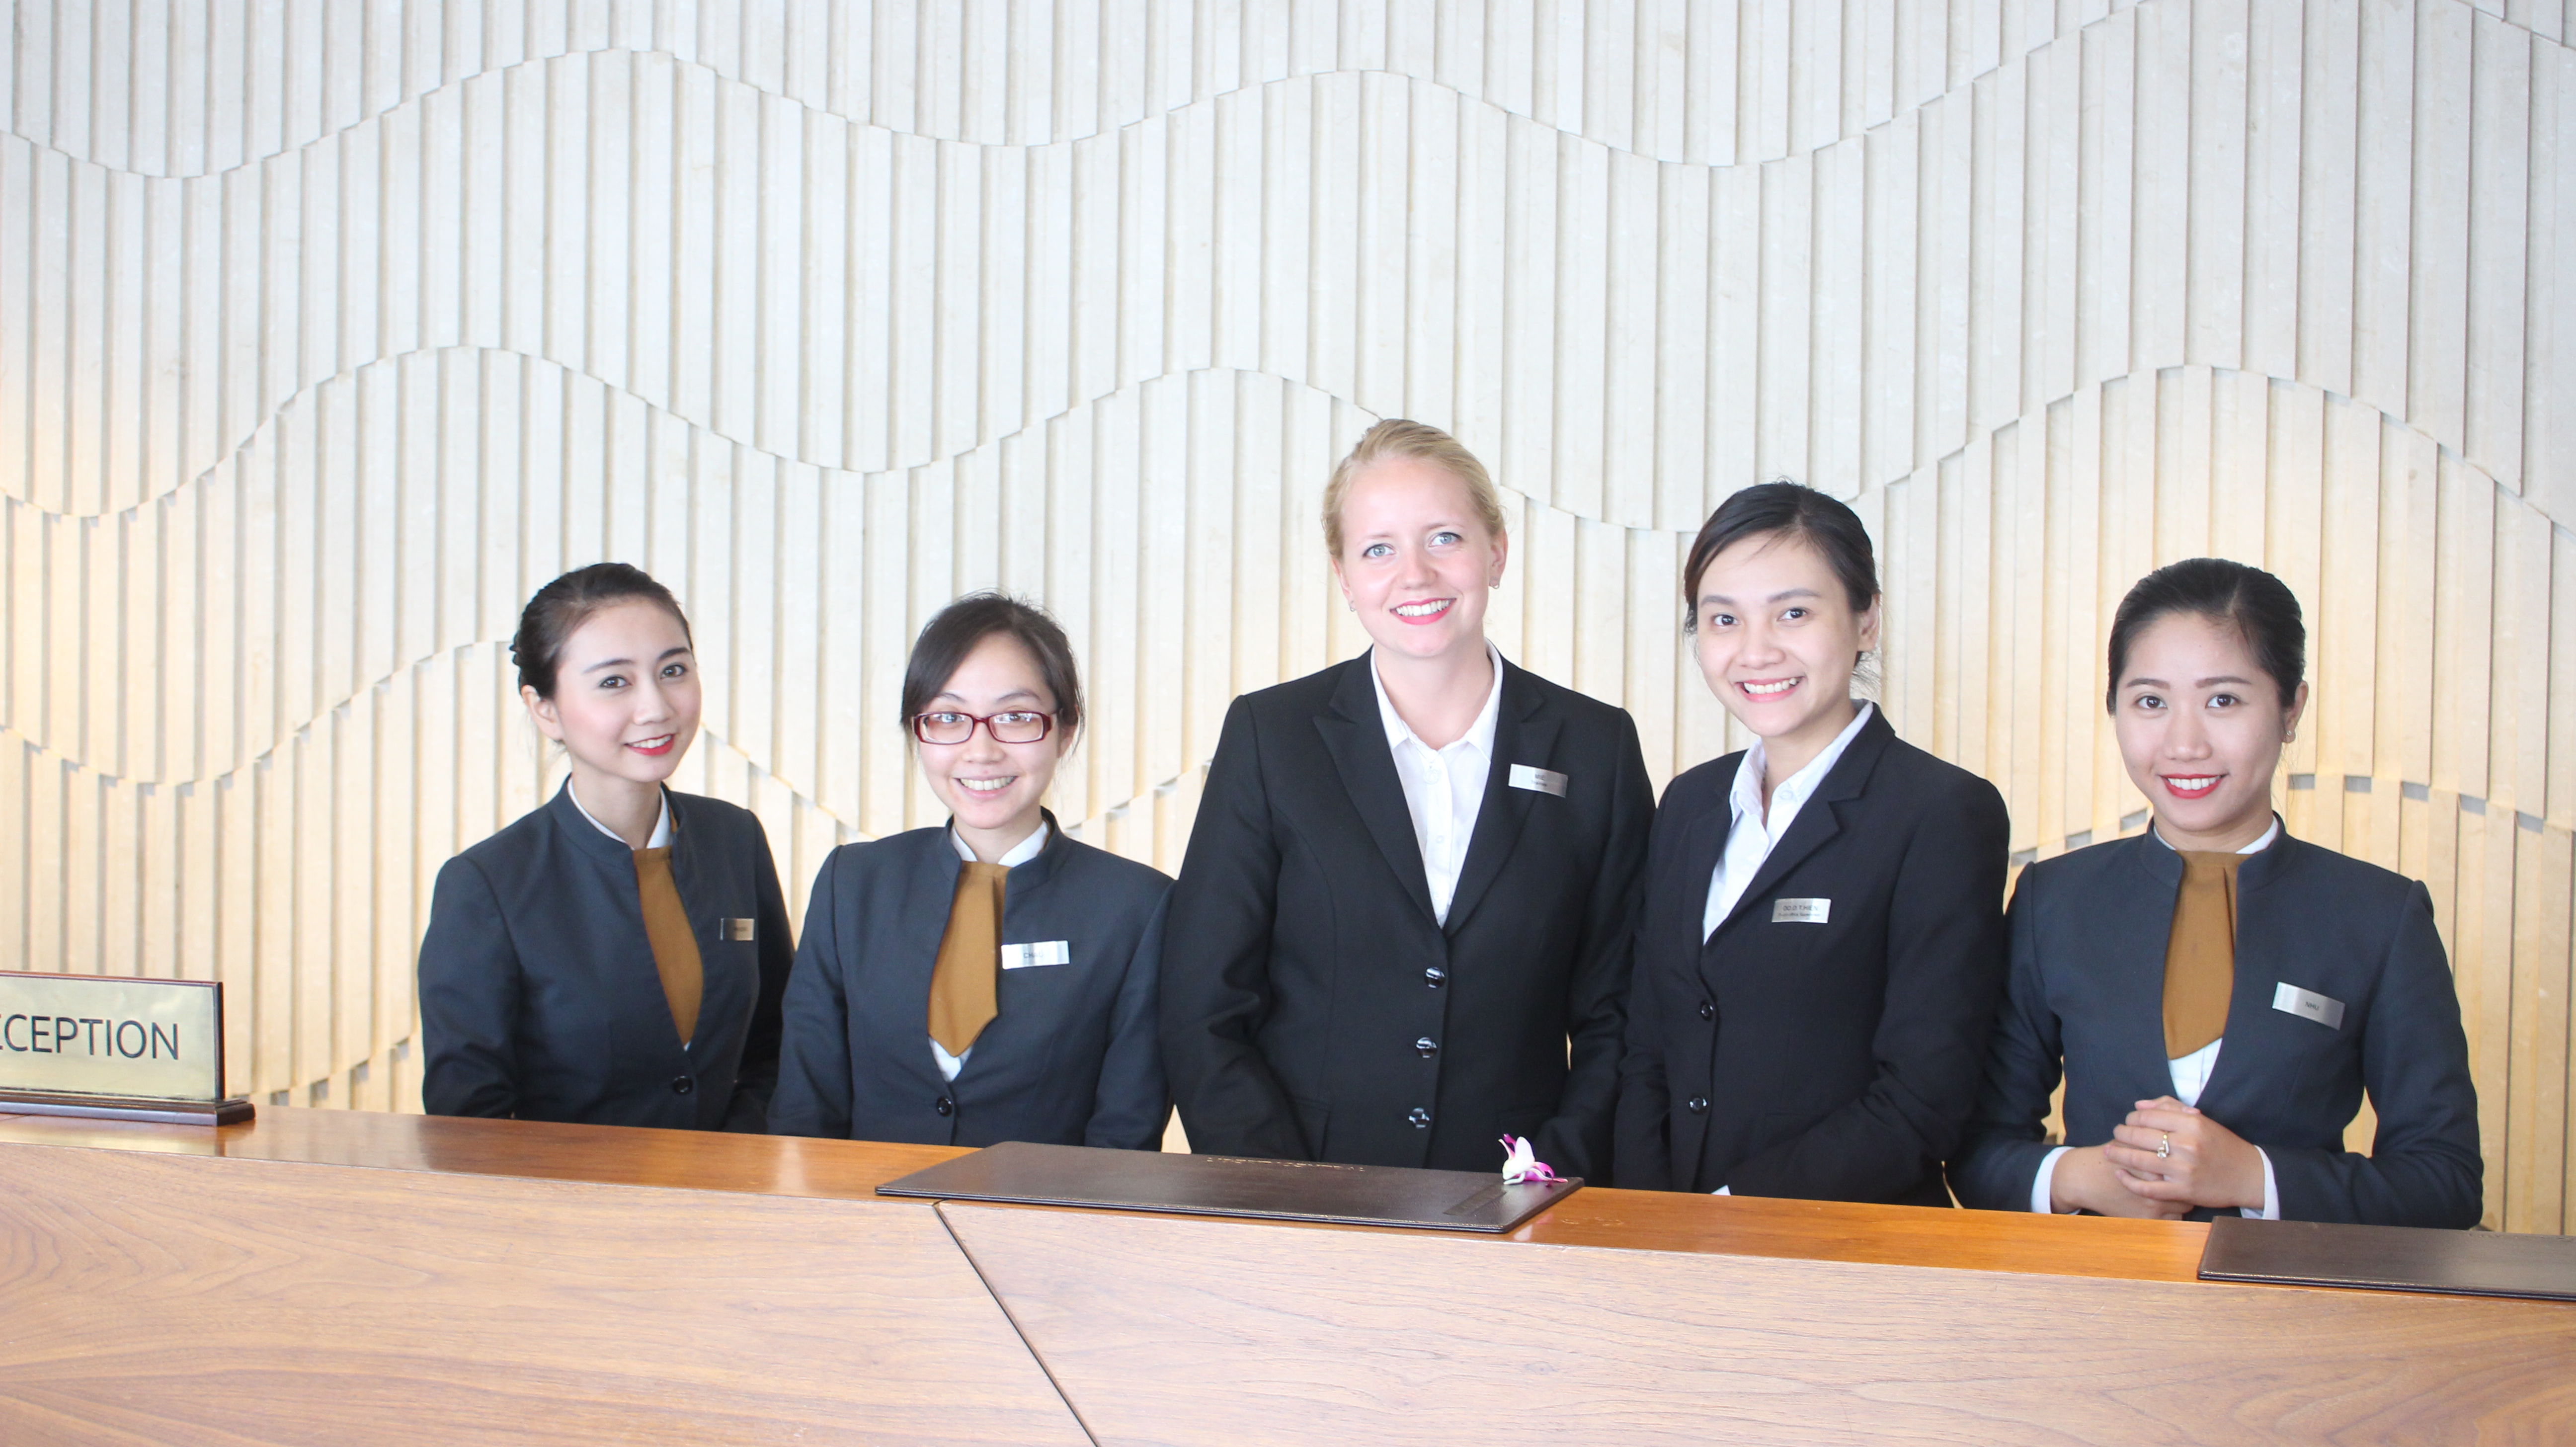 Five workers of the reception during internship